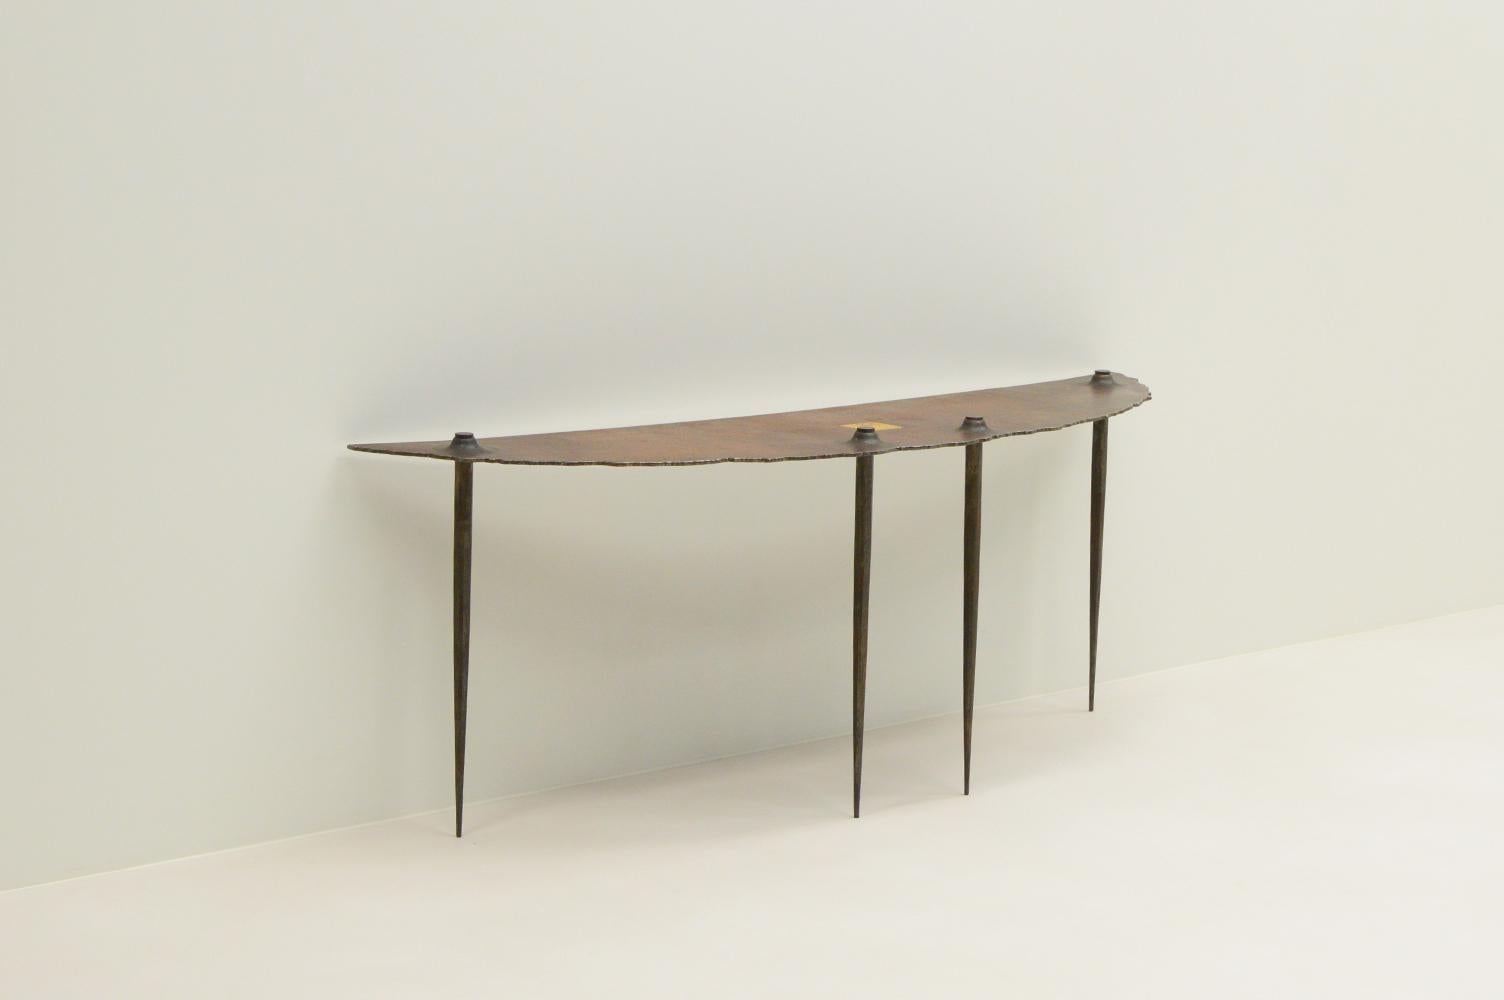 Brutalist side table by Idir Mecibah for Smederij Moerman, 1990s Belgium. This side table is part of the Scrab series. Made of forged steel. In the center is a gold leaf square. Idir died at a young age and most of his designs aren’t produced